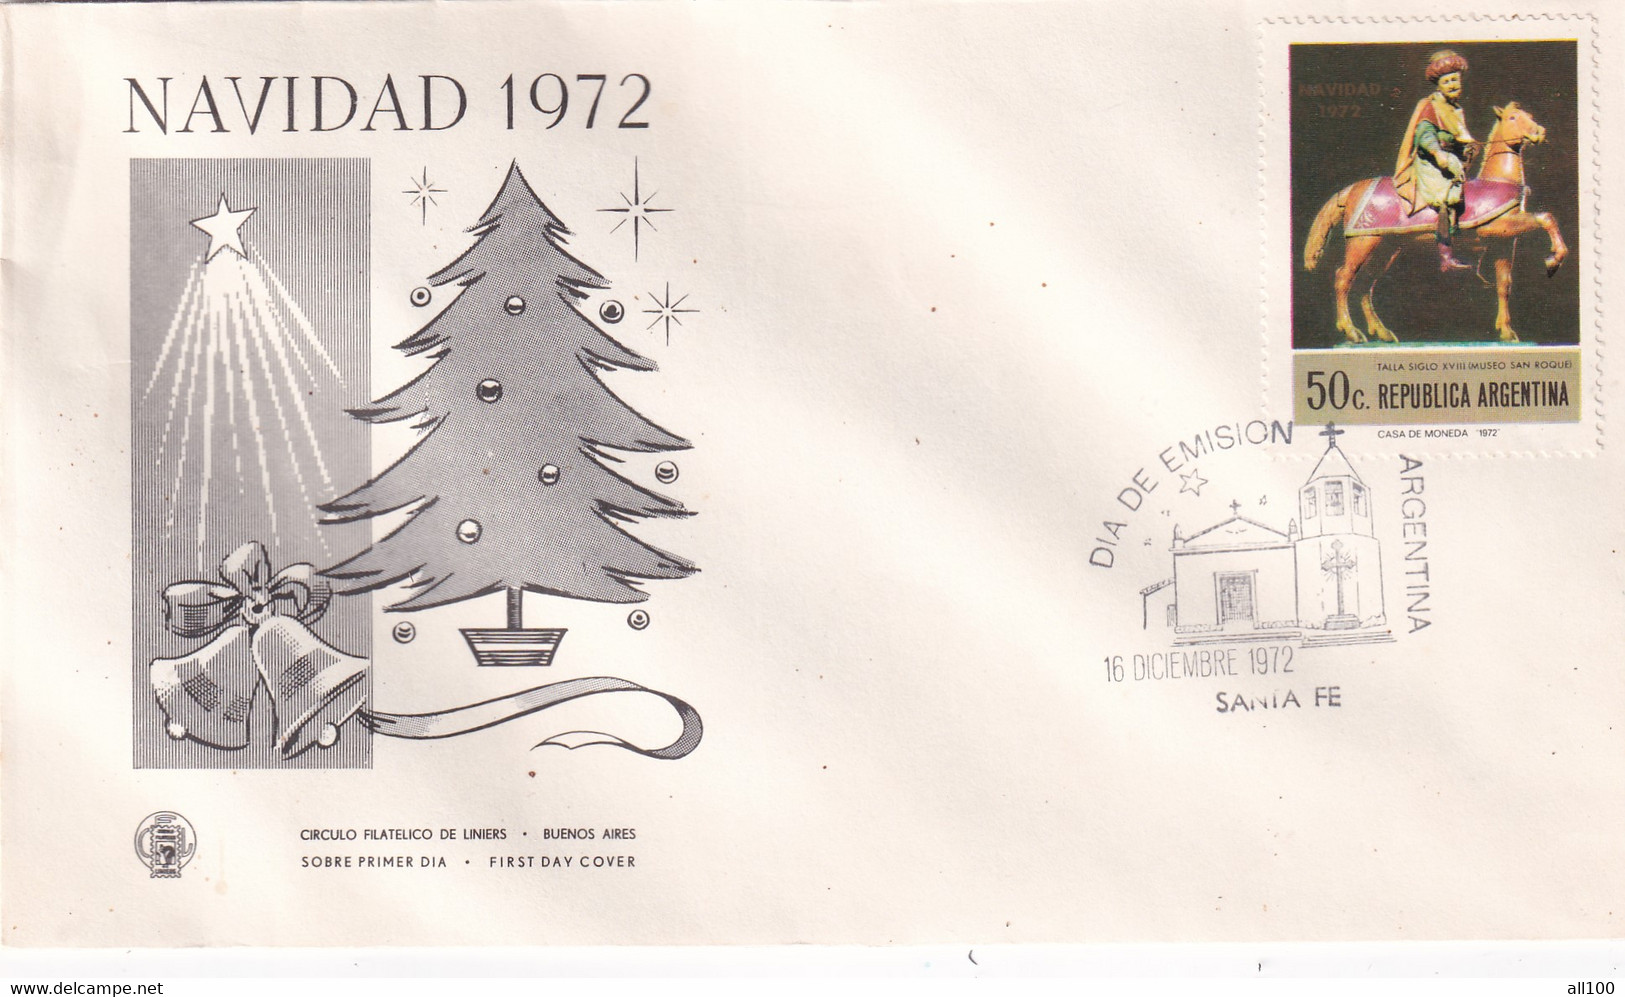 A21881 - FDC Navidad Christmas Cover Envelope Unused 1972 Stamp Republica Argentina Talla Siglo Museo San Roquei Horse - Covers & Documents